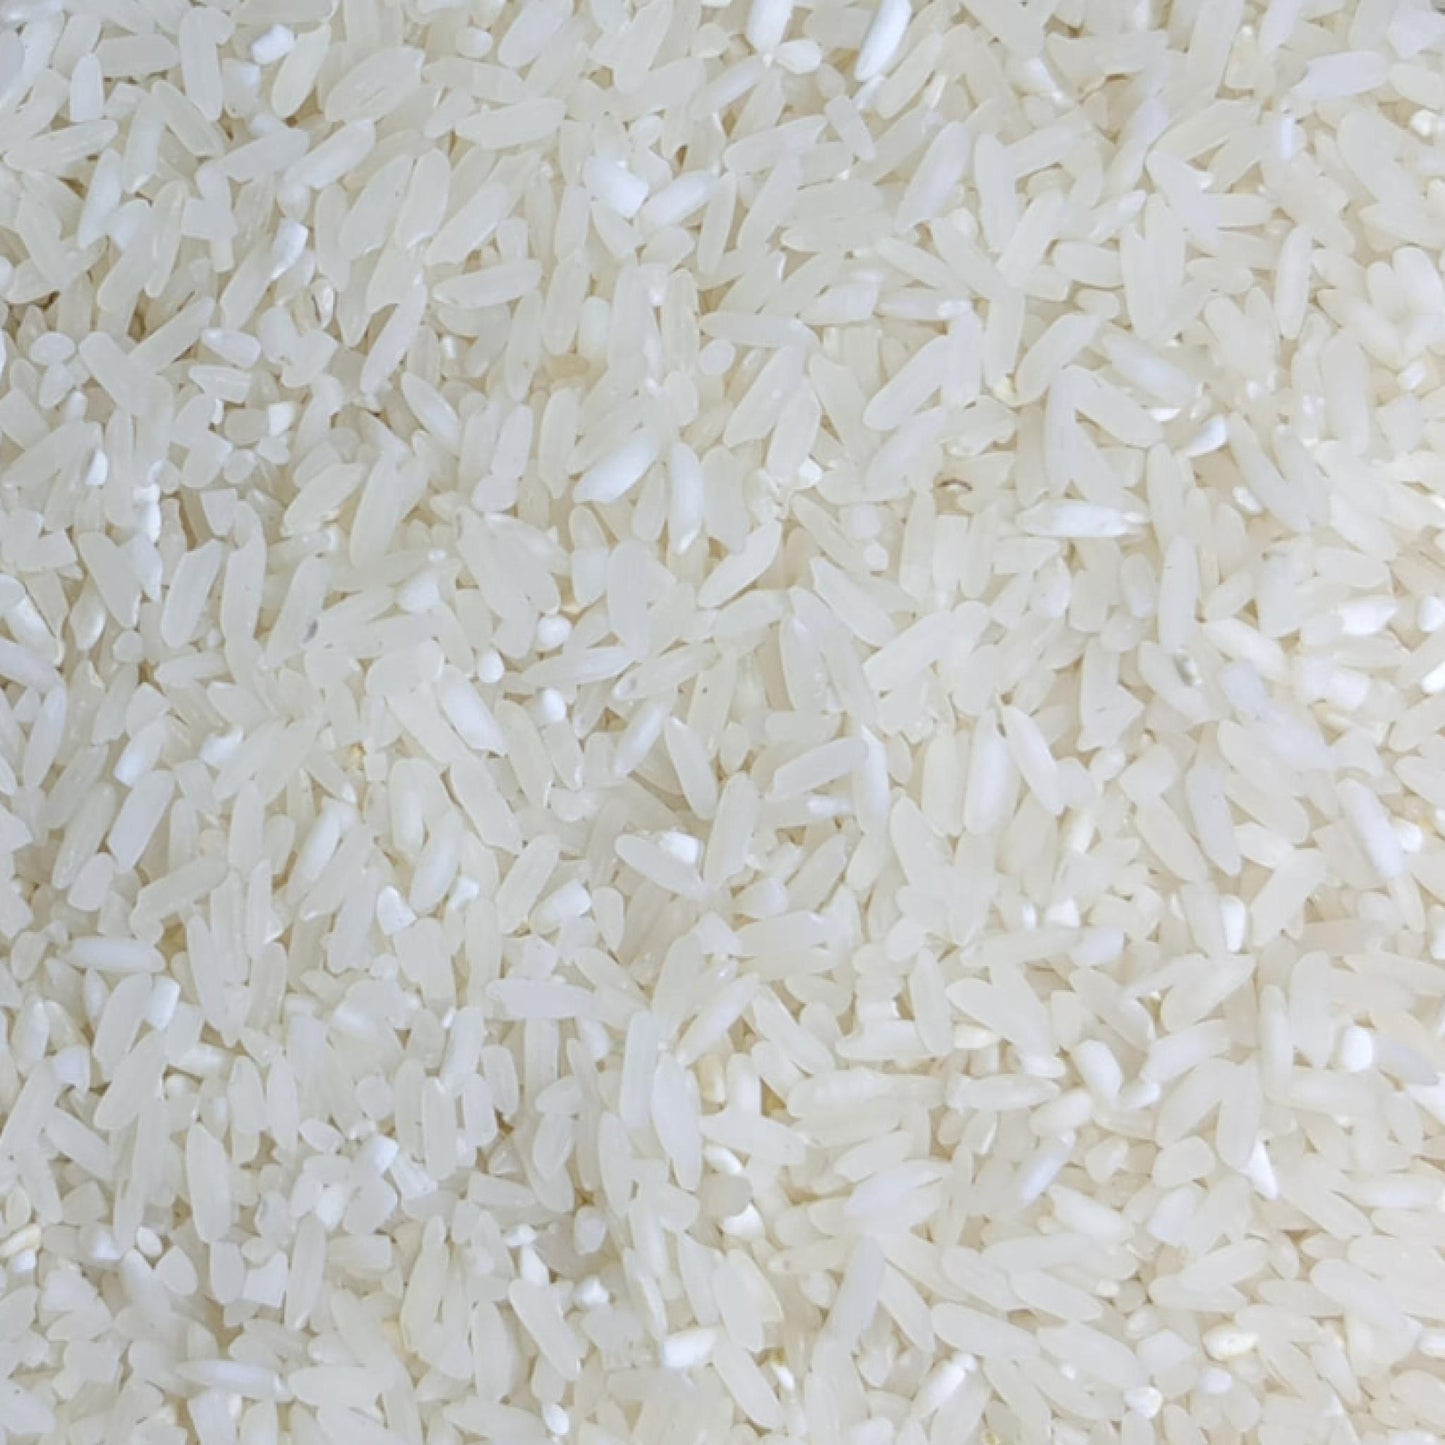 Cherry Pink Rice (Well-Milled)